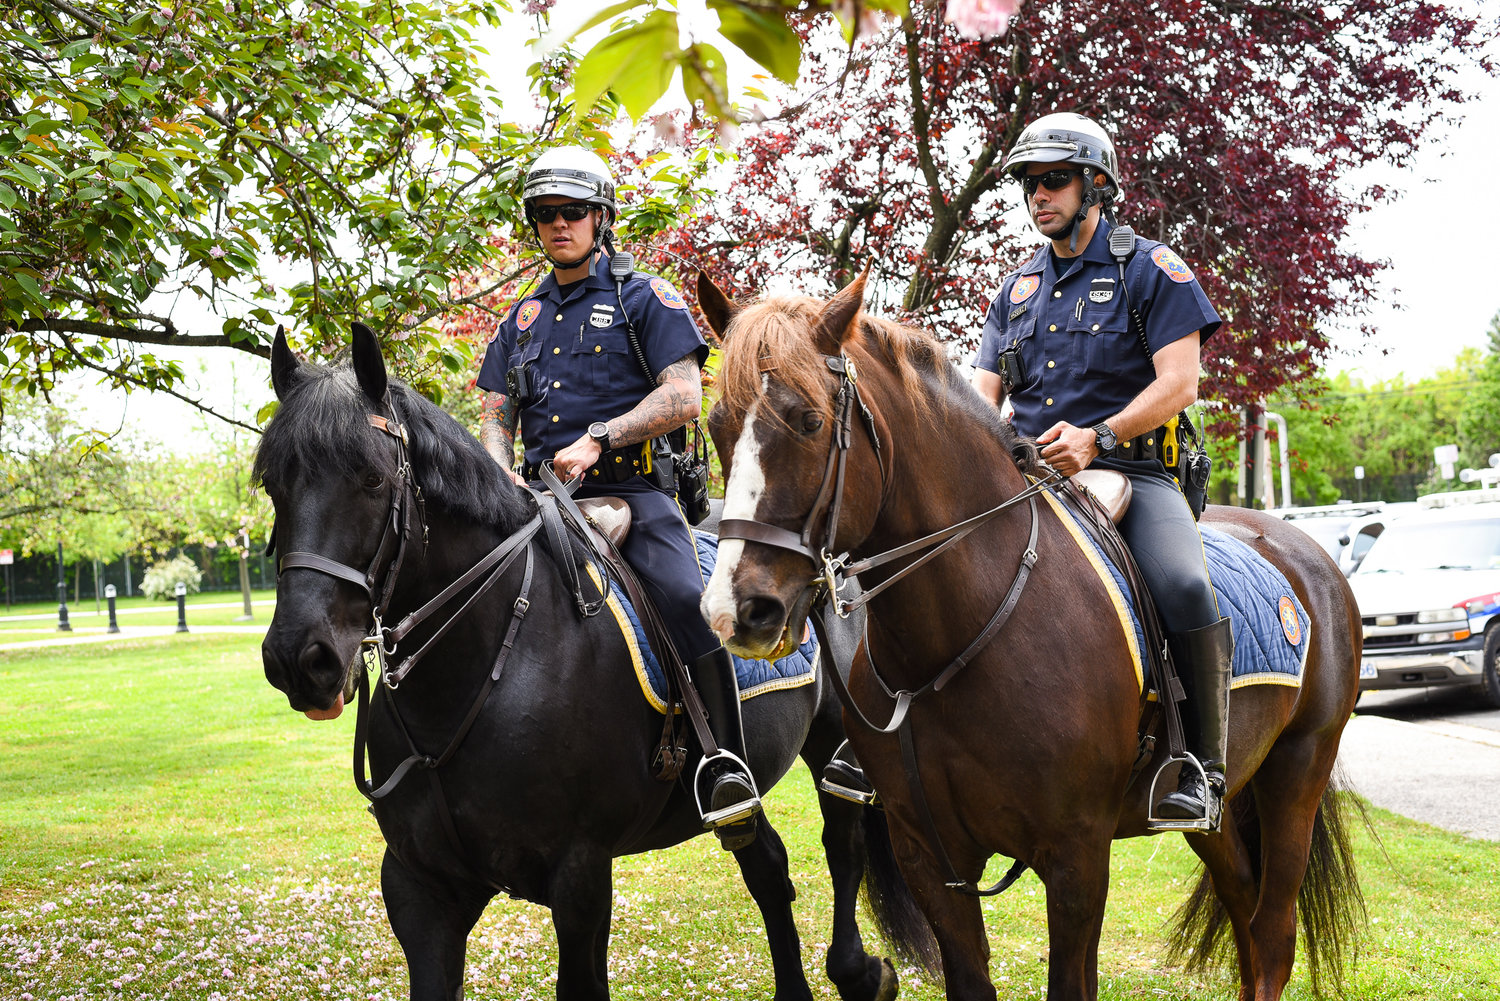 Two mounted officers from the Nassau County Police Department greeted visitors at the Freeport Police Open House.